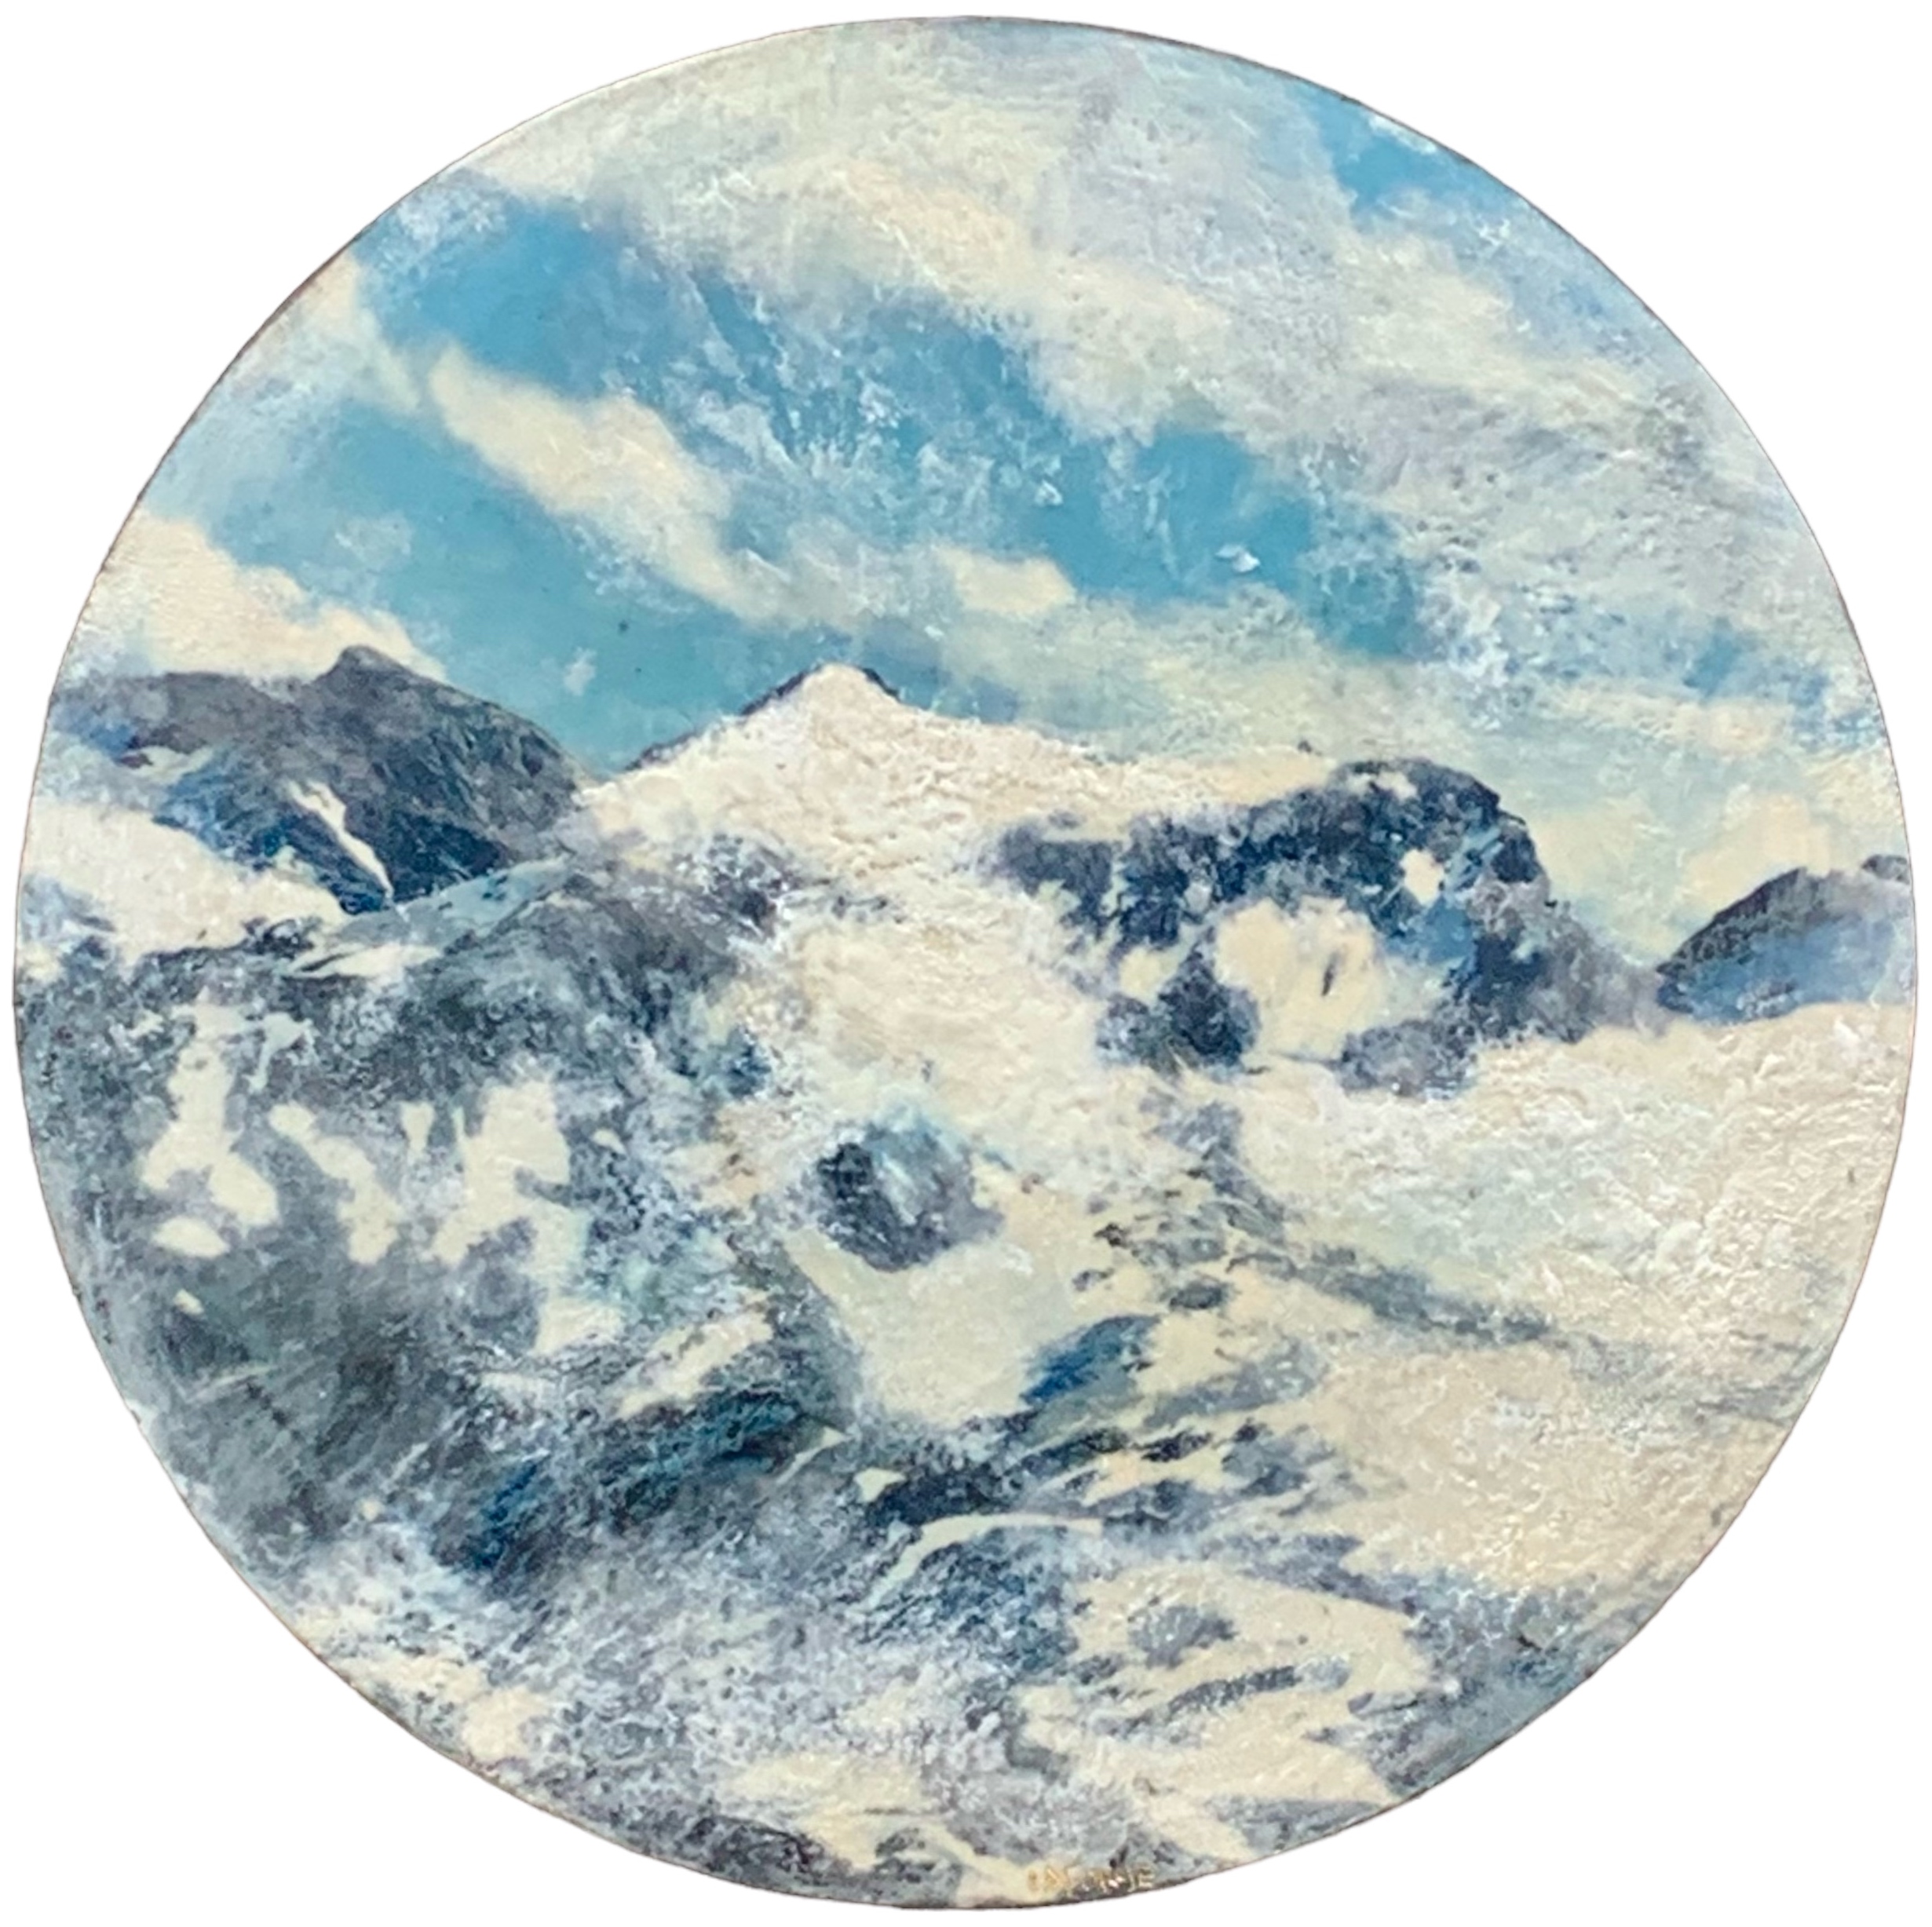 Mountain High, encaustic winter mountain landscape painting by Lee Anne LaForge at Effusion Art Gallery in Invermere, BC